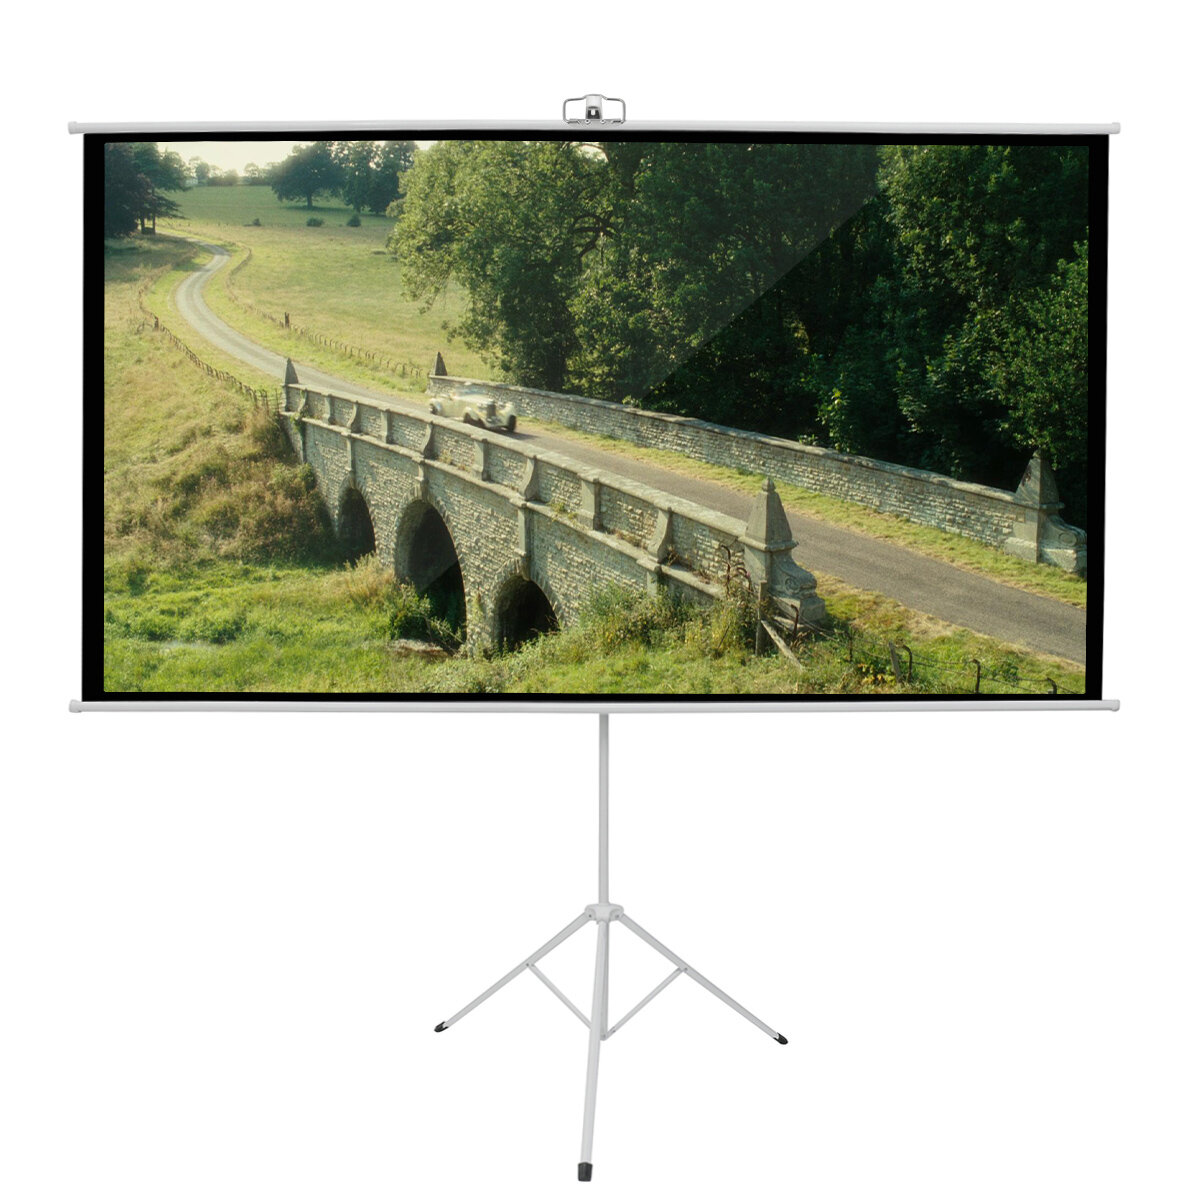 100-inch 16:9/4:3 Projector Screen with Tripod Stand Glass Fiber HD Projection Screen for Home Offic